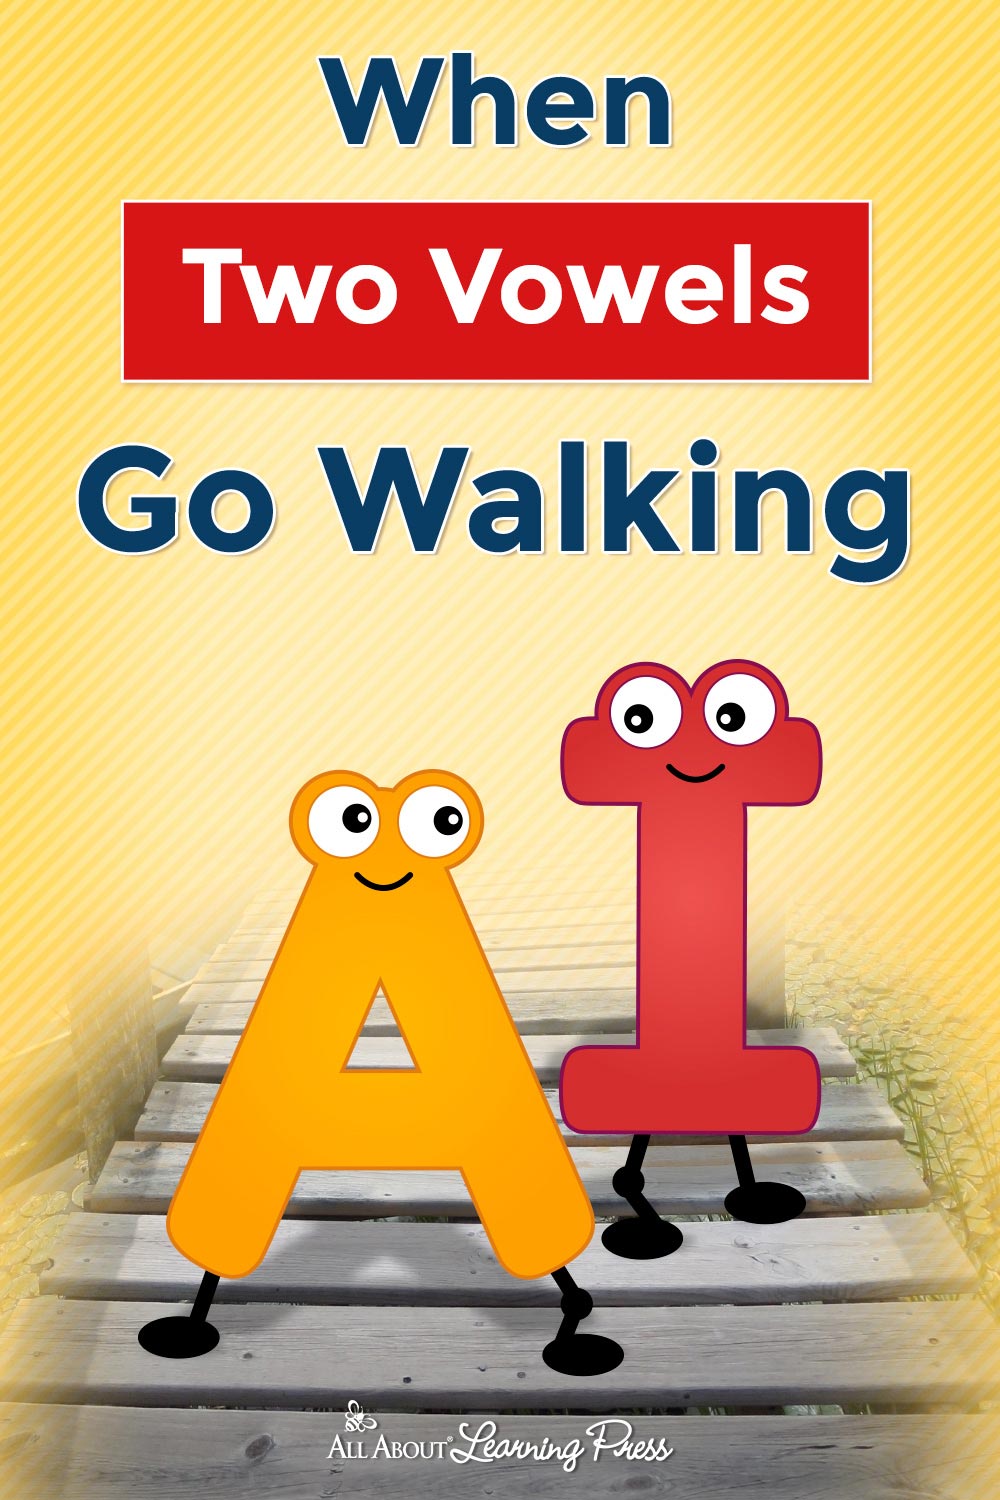 when-two-vowels-go-walking-debunking-the-rule